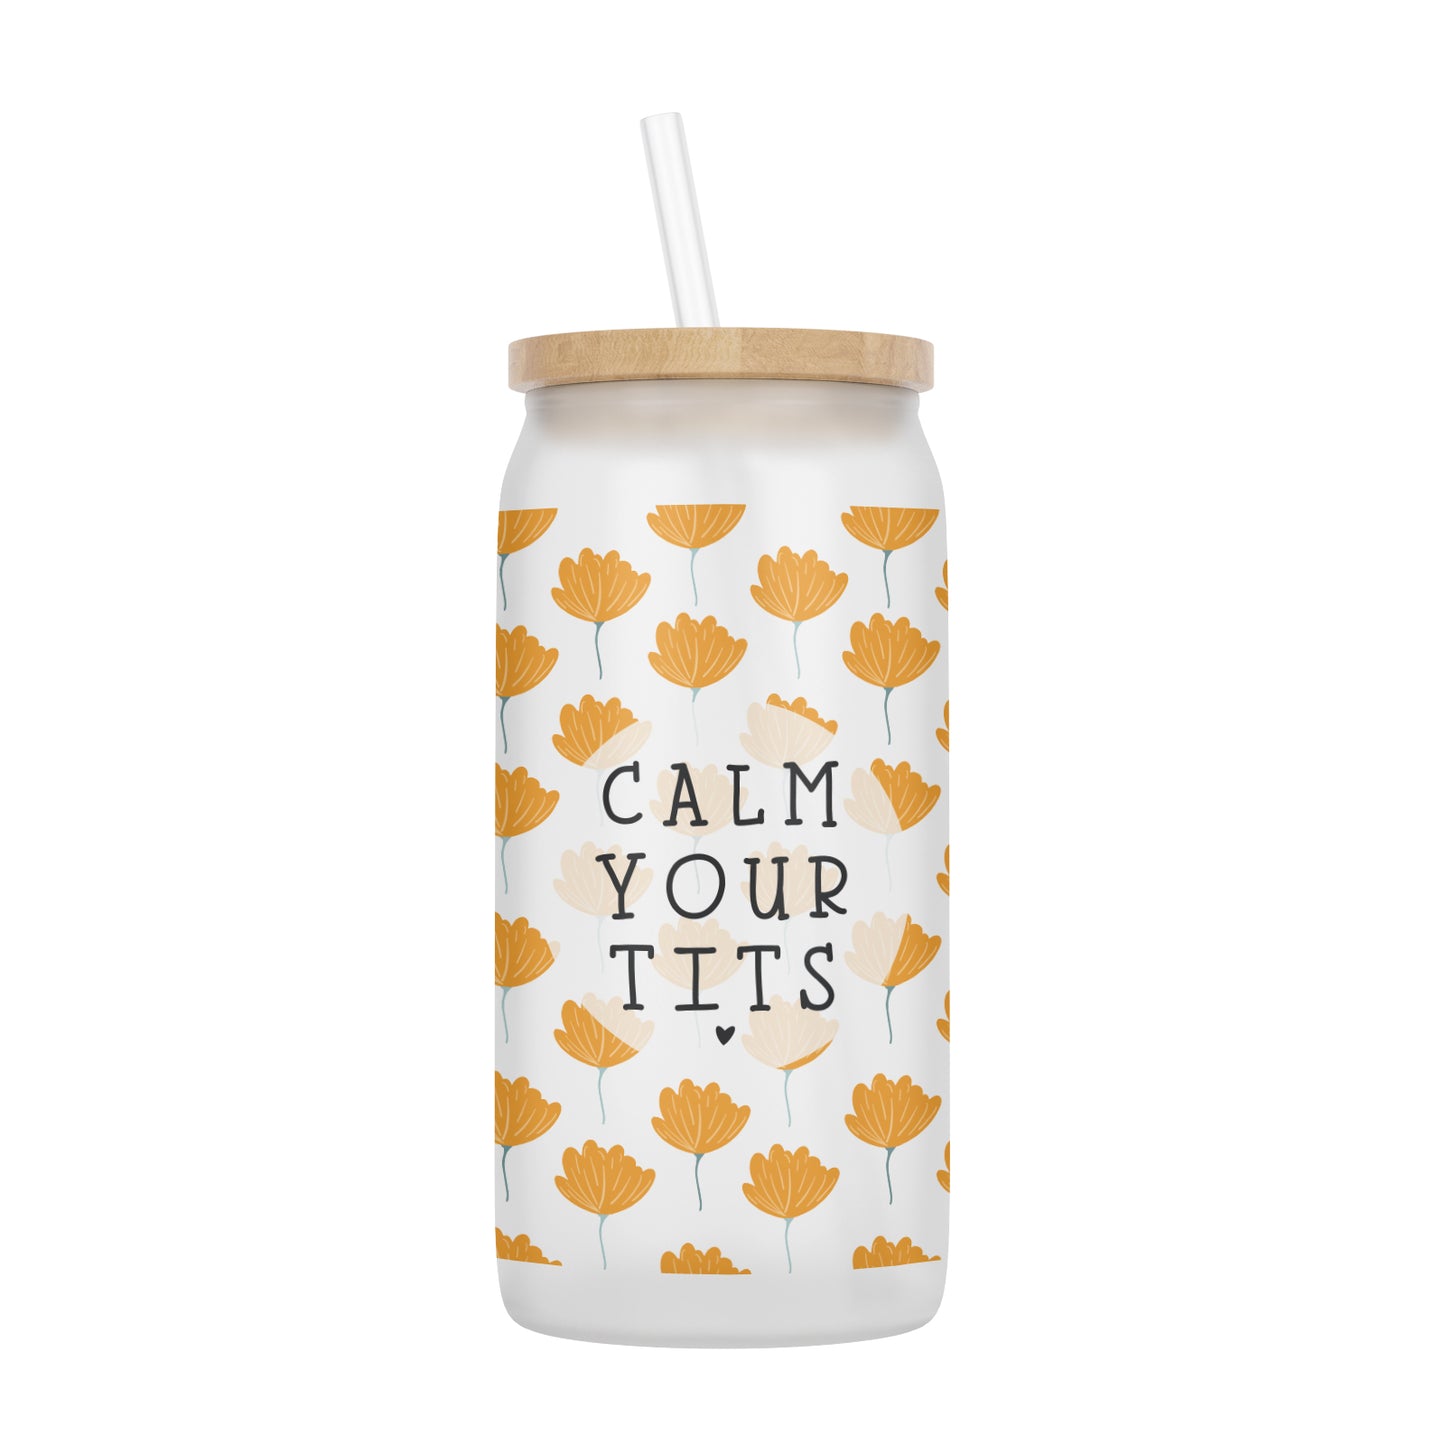 Calm Your Tits 16 oz Glass Jar With Lid